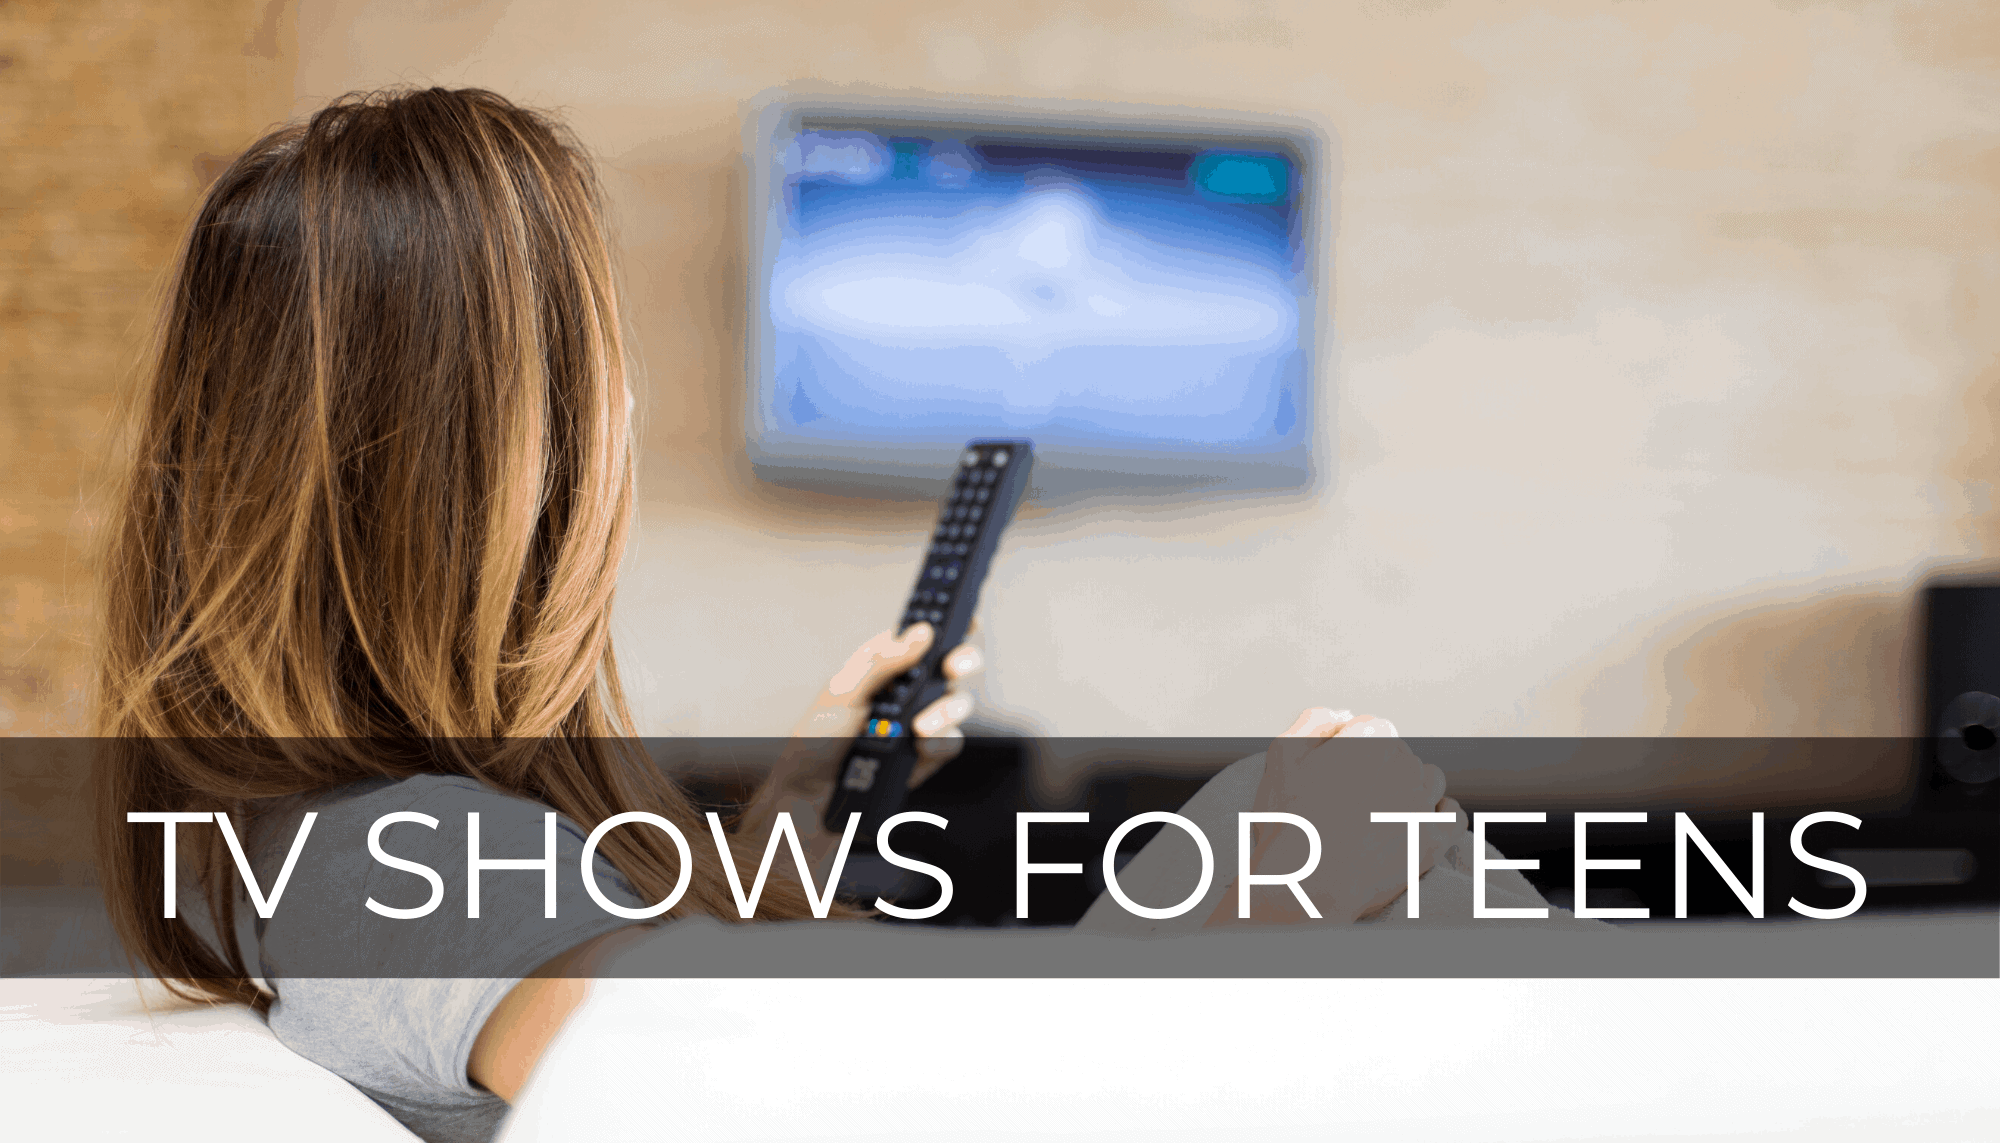 TV shows for teens